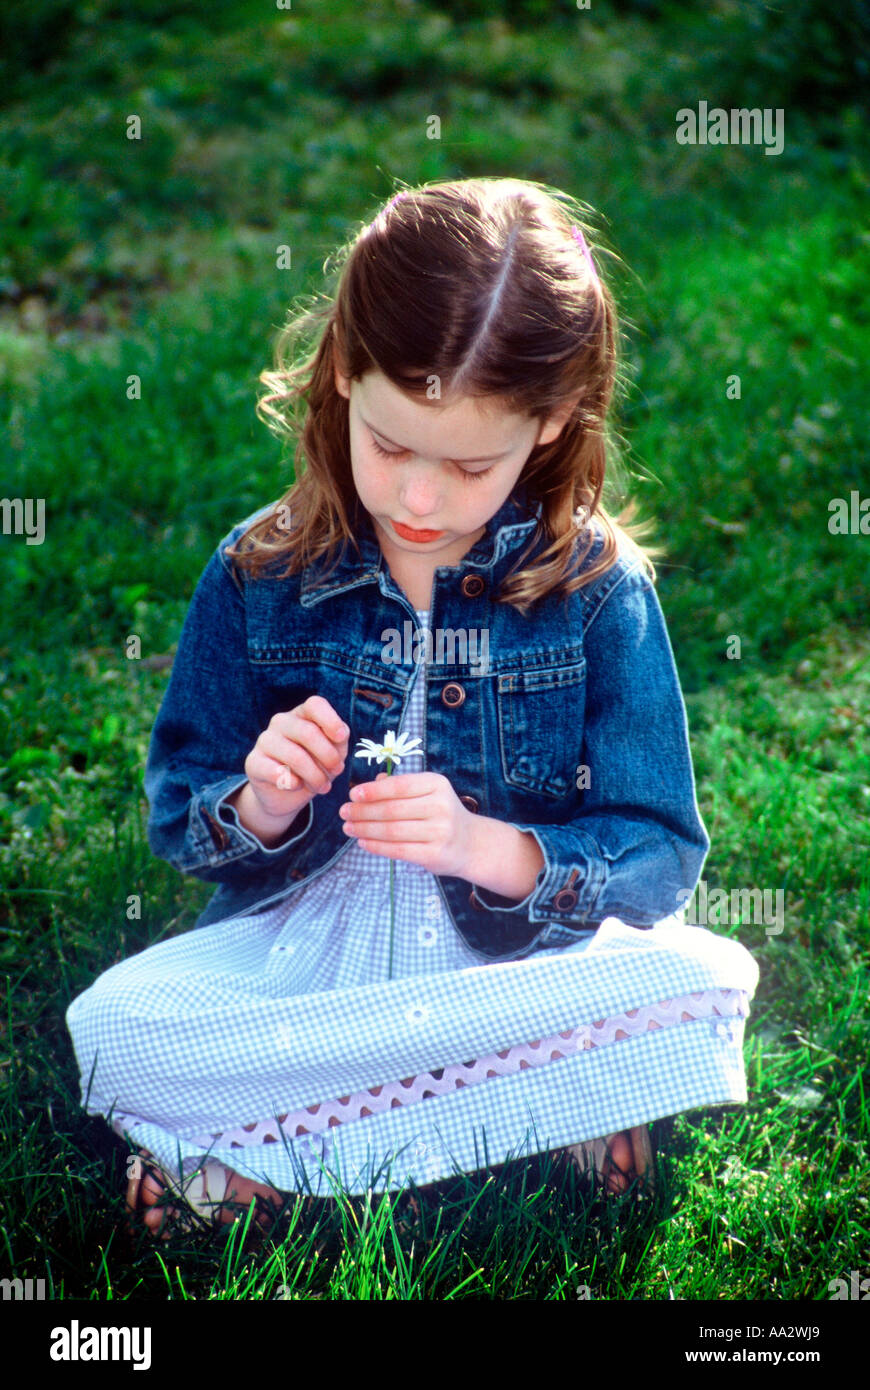 A little girl sitting with a daisy flower Stock Photo